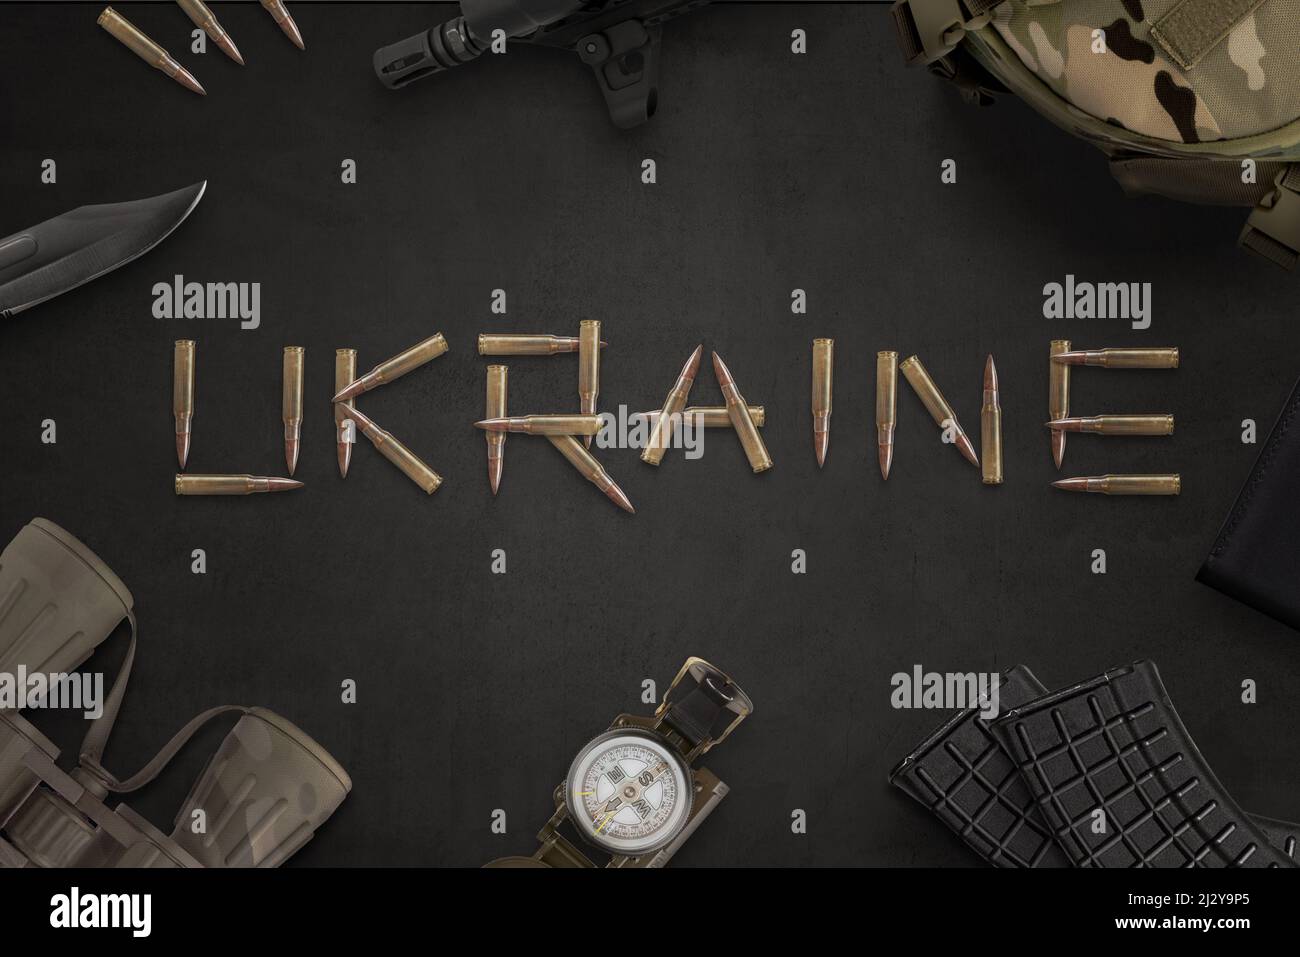 Ukraine war concept. Ukraine text written with bullets from an automatic rifle and surrounded by military equipment Stock Photo